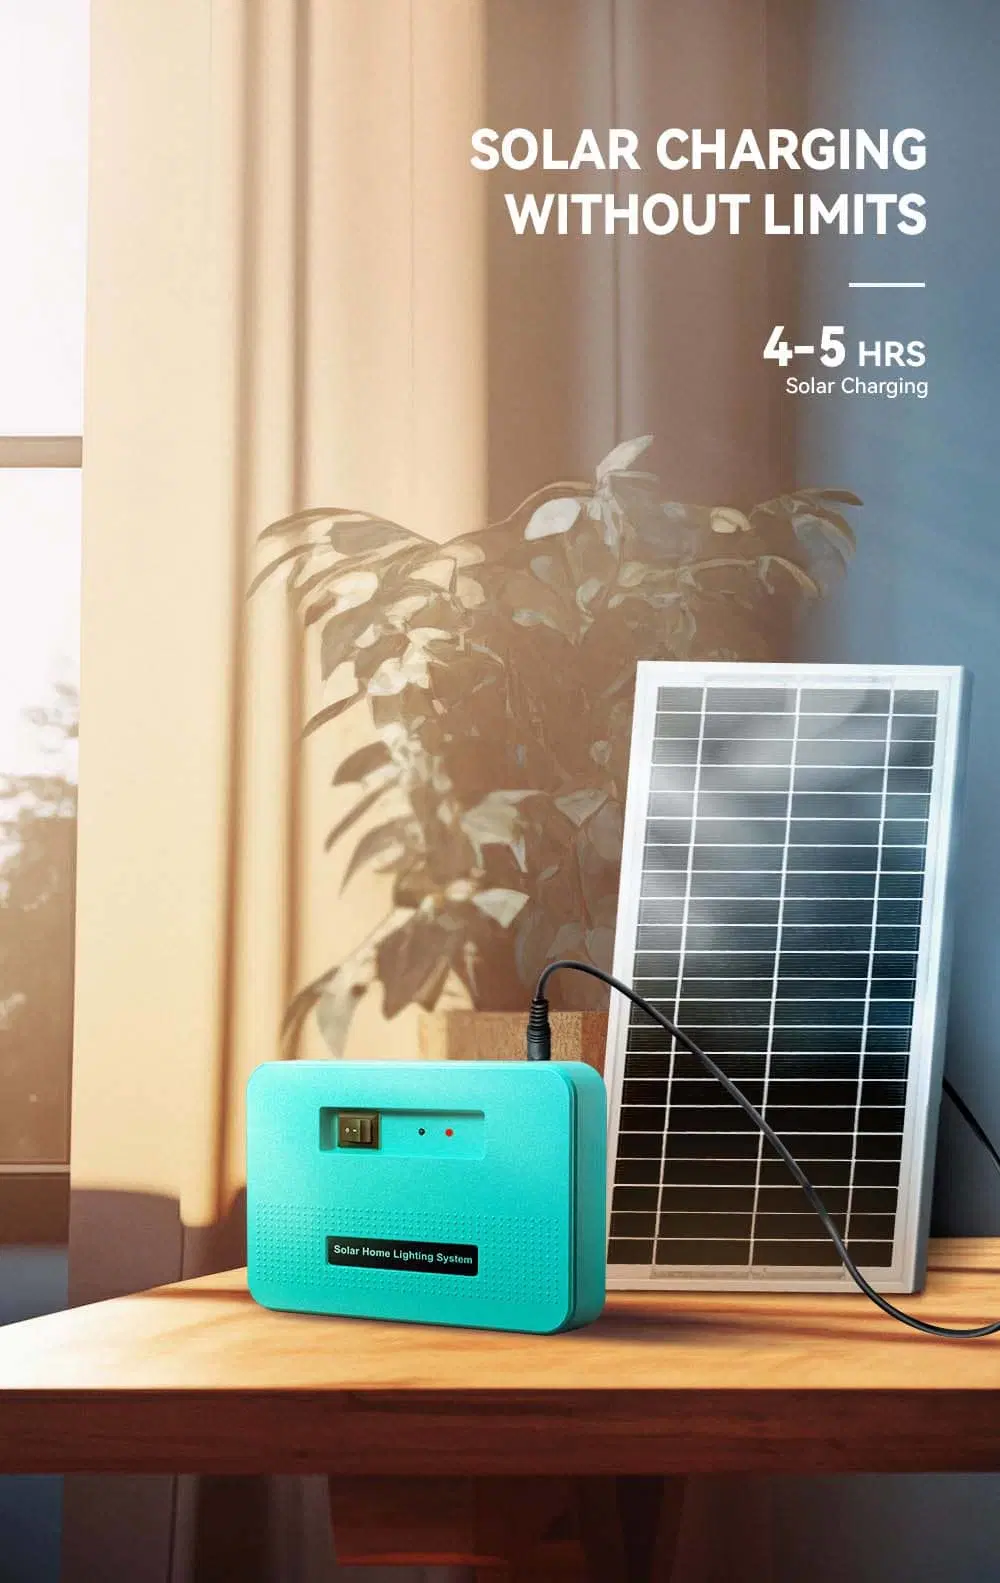 Portable Smart Residential Solar Hybrid Energy System for Home Office off-Grid Lithium Battery Power Storage with 4 LED Lights